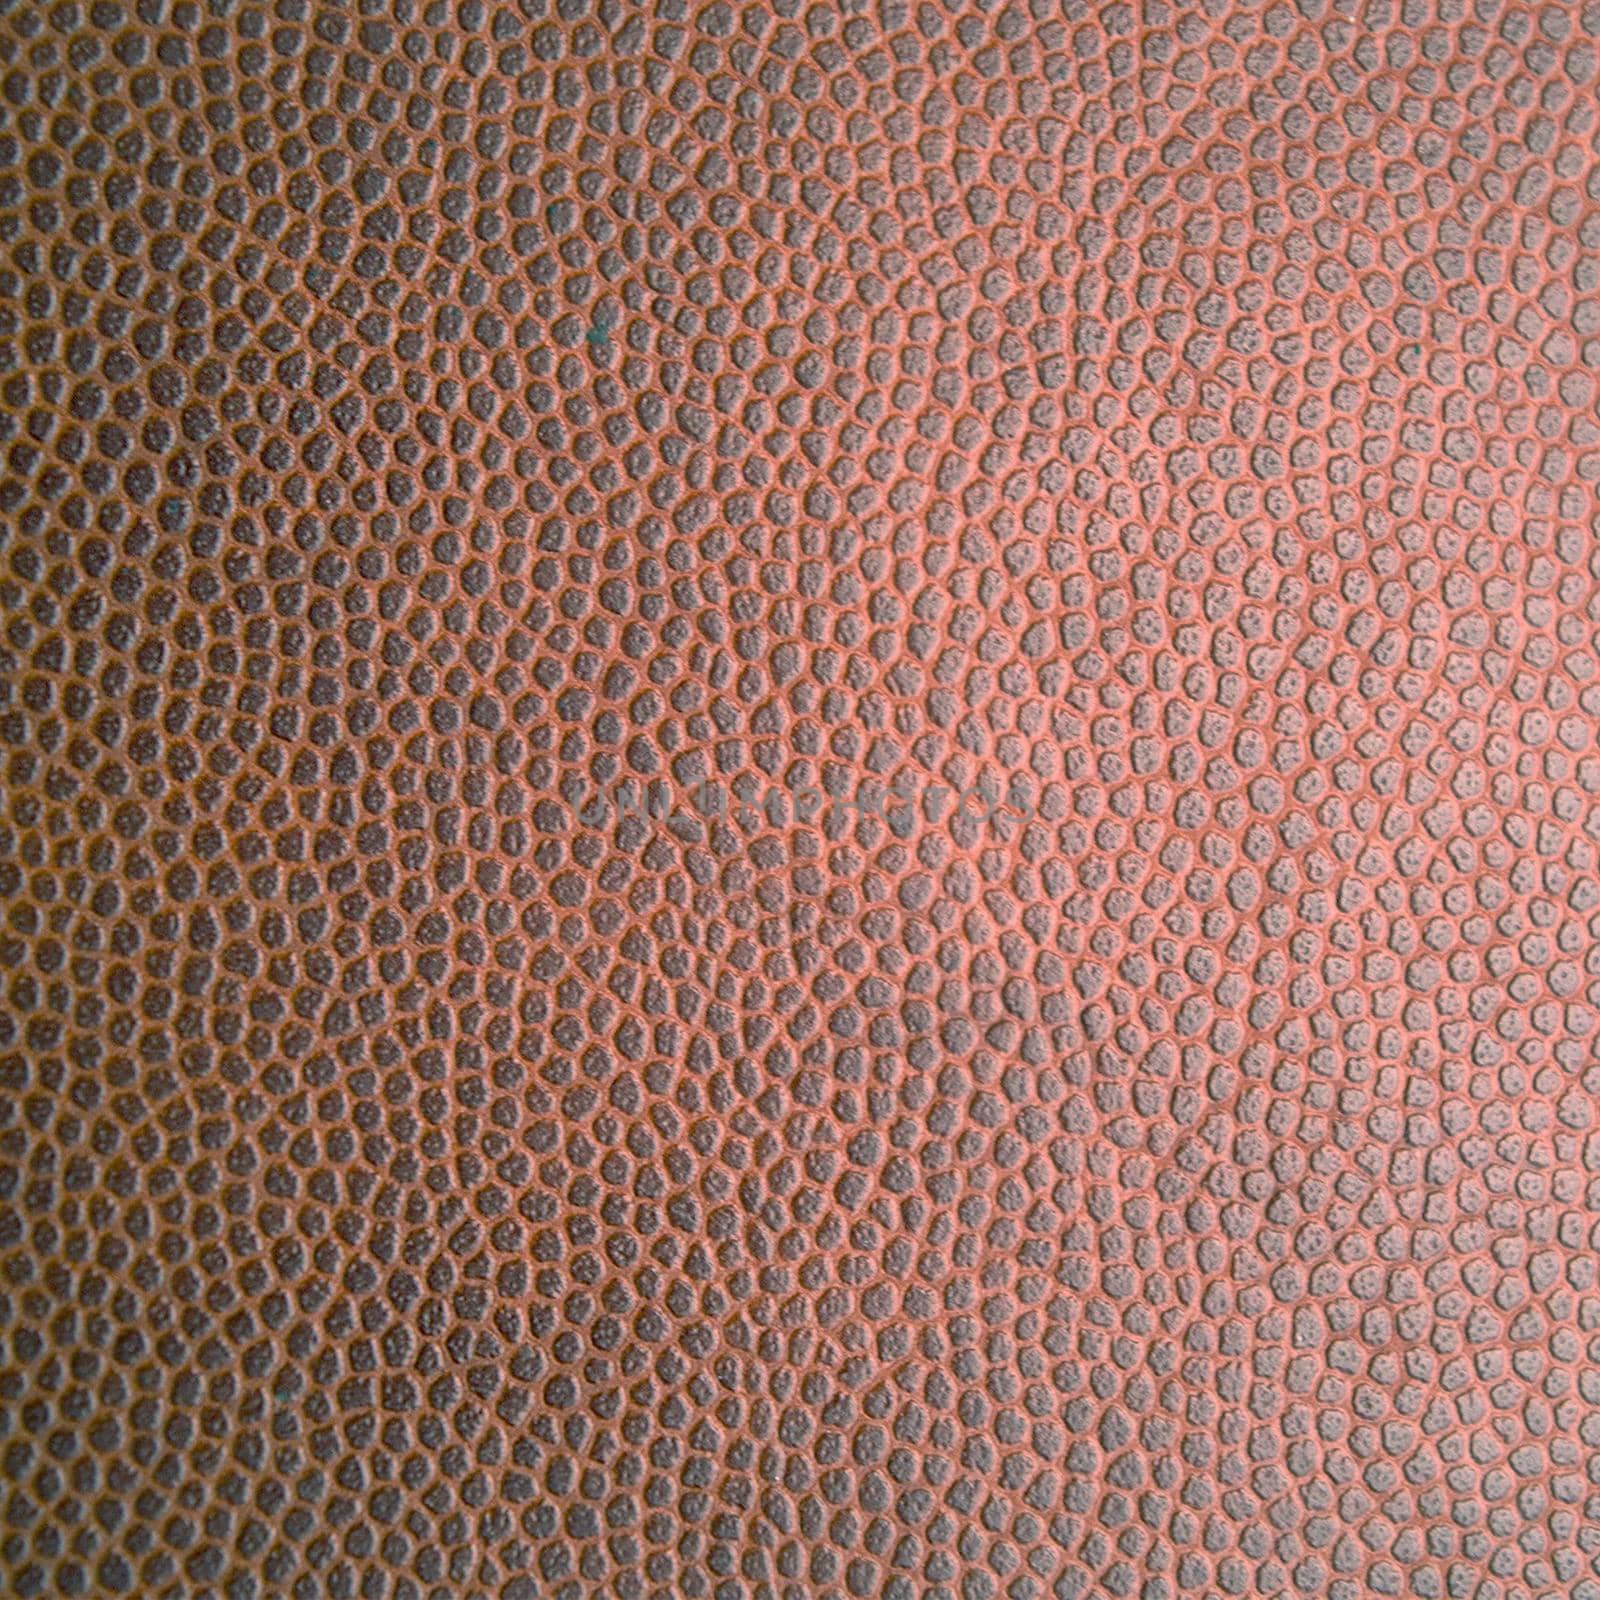 Background image of artificial textured leather close-up